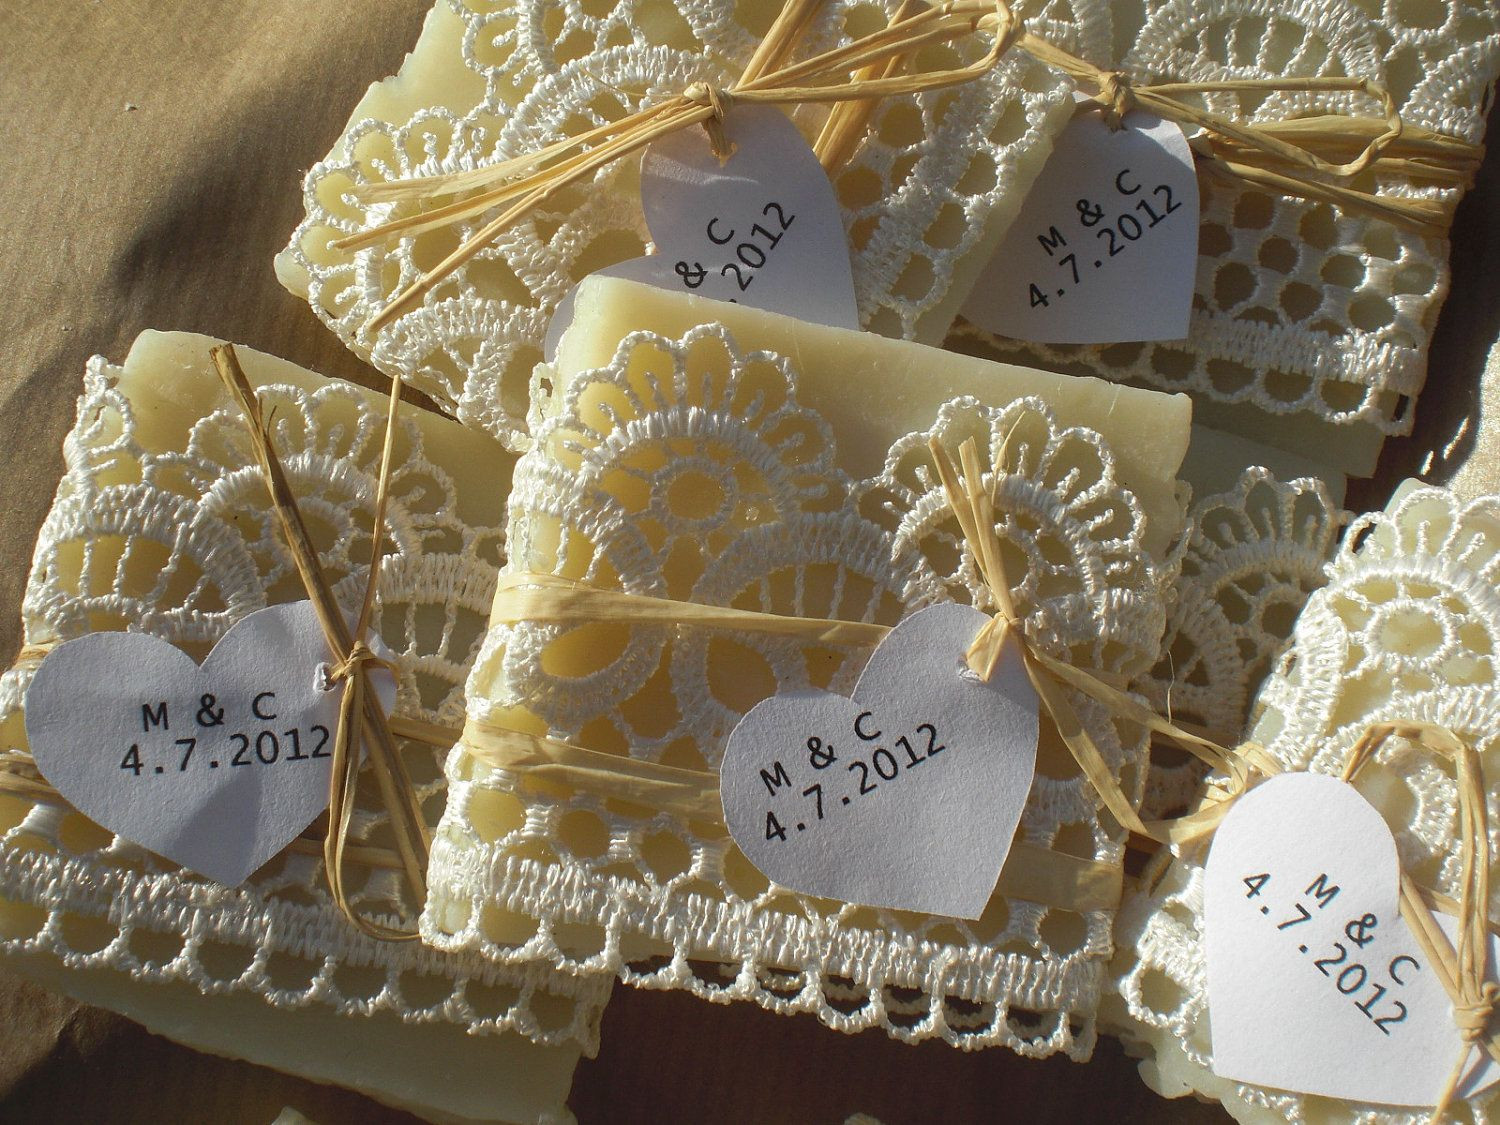 Free Wedding Favor Samples
 10 Mixed Wedding Favor Samples All natural Soaps with